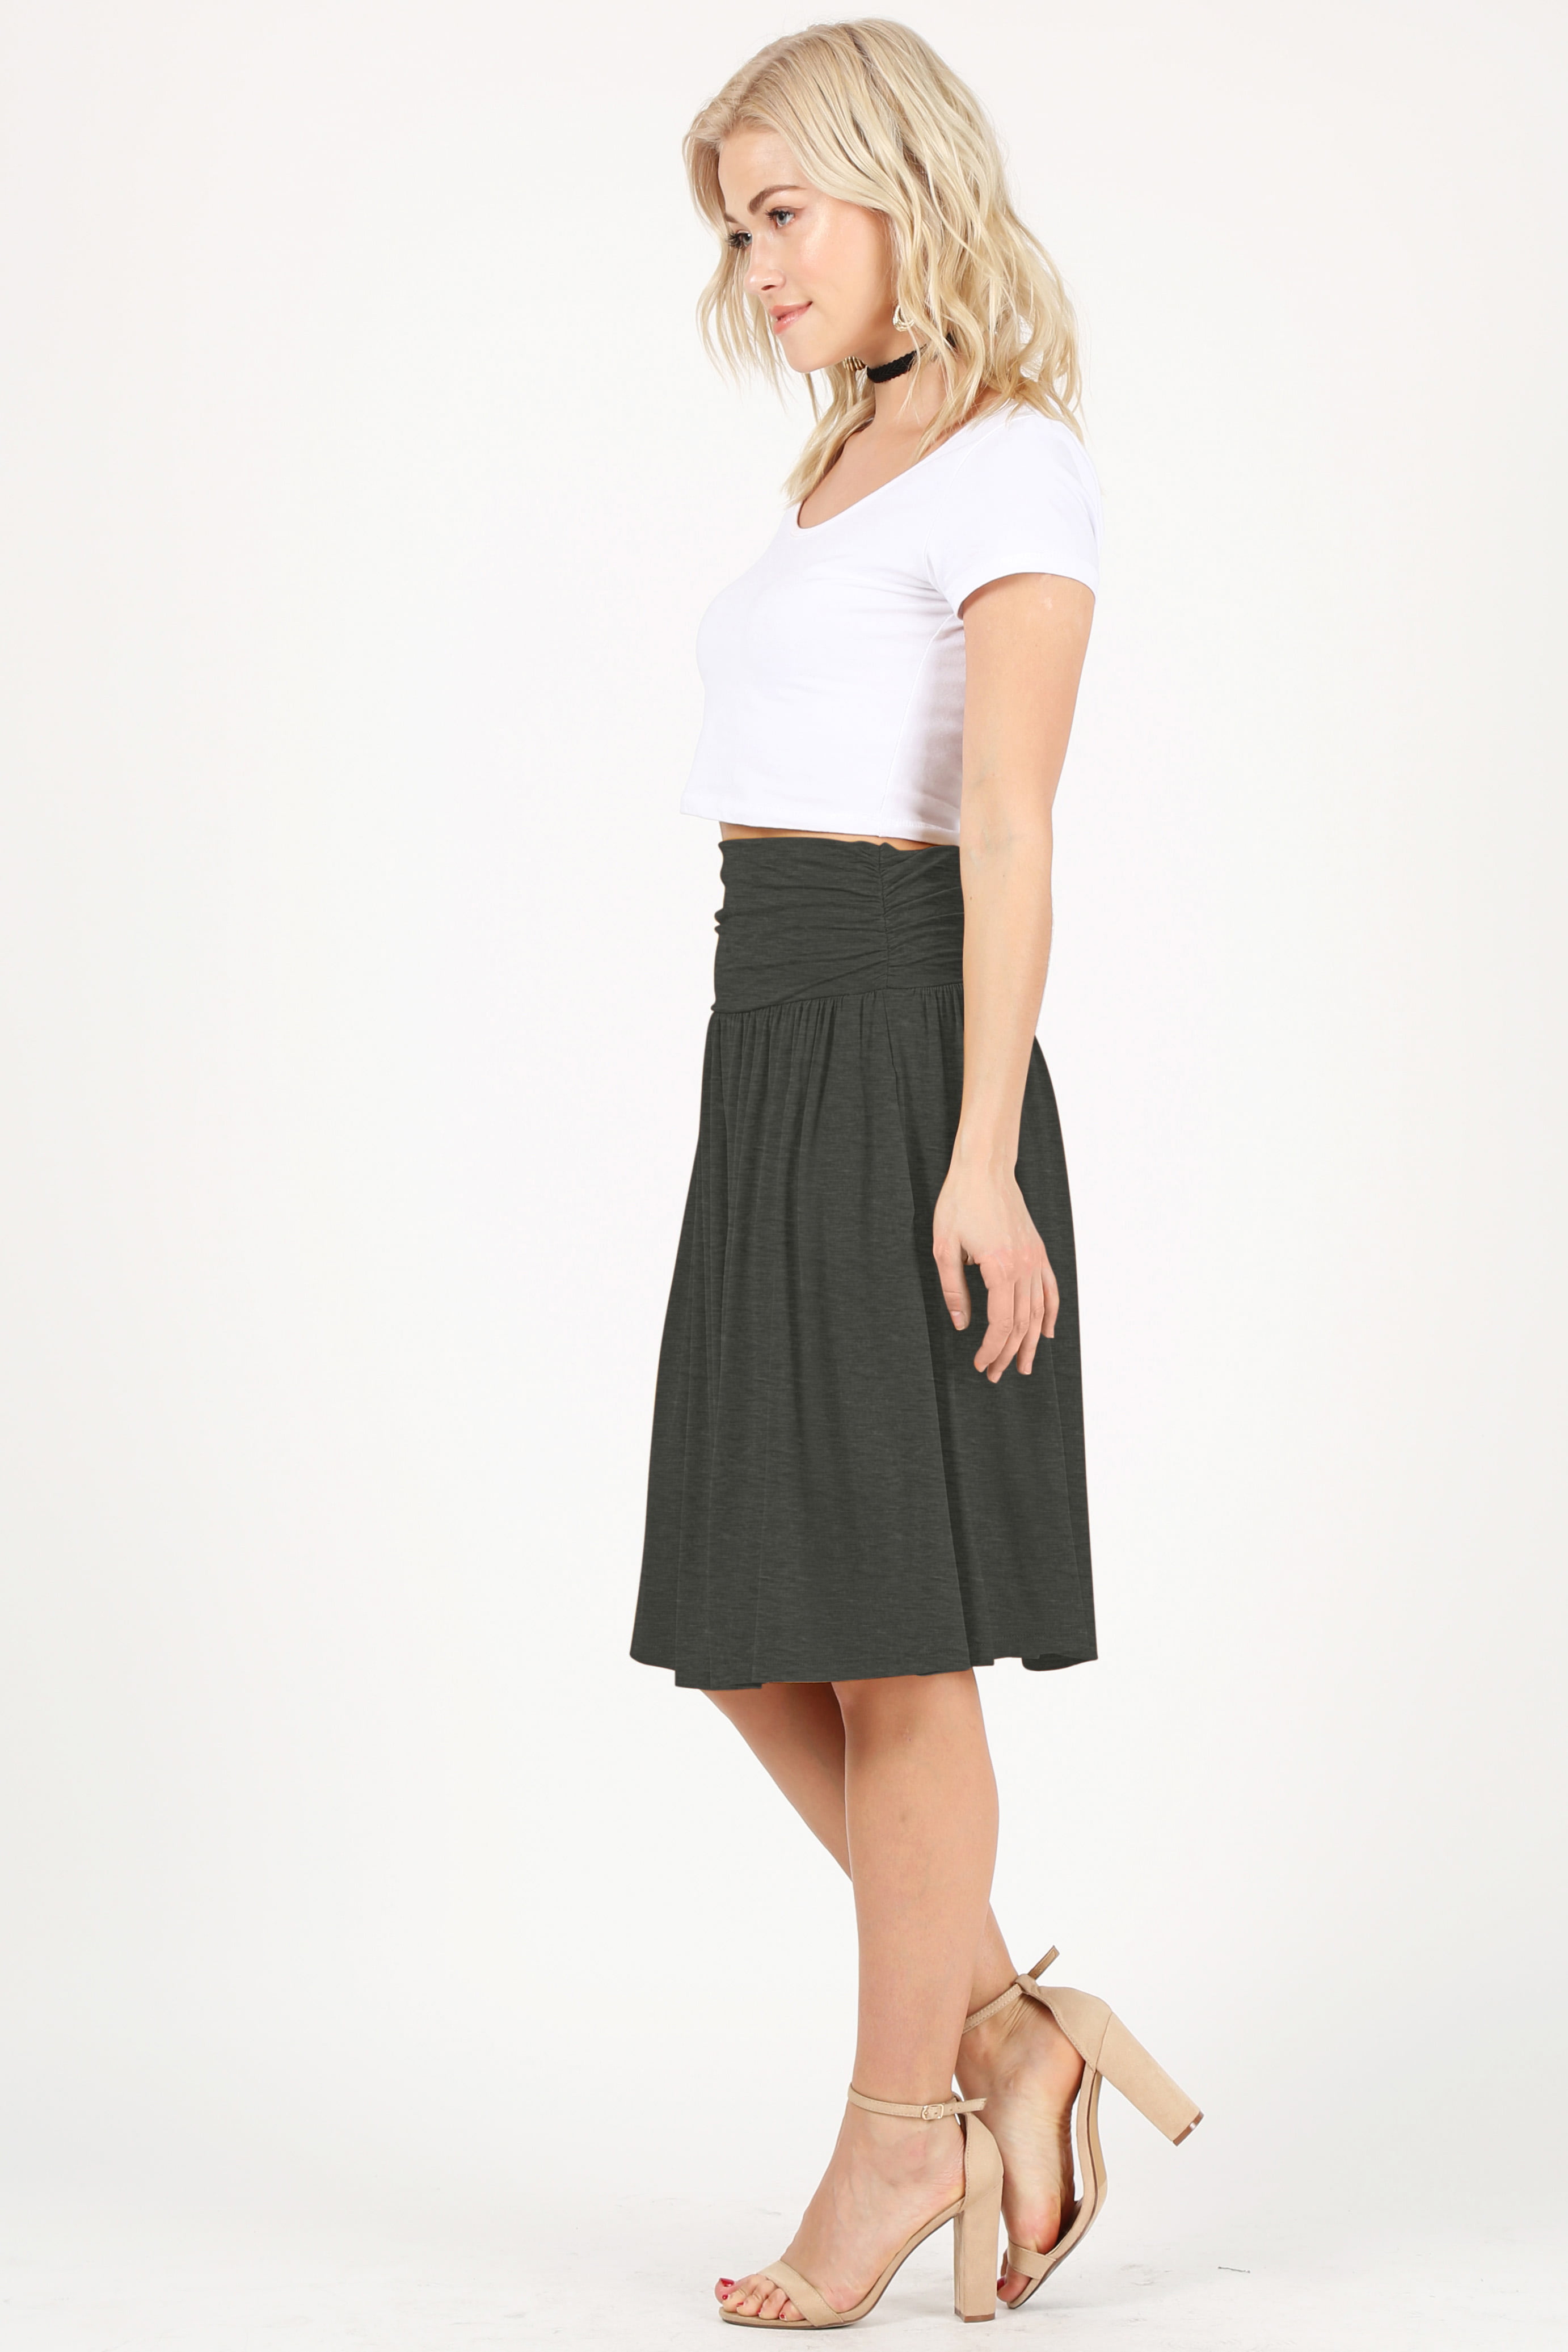 Simlu Womens Regular and Plus Size Skirt with Pockets Below The Knee Length Ruched Flowy Skirt Midi Skirt for Women 